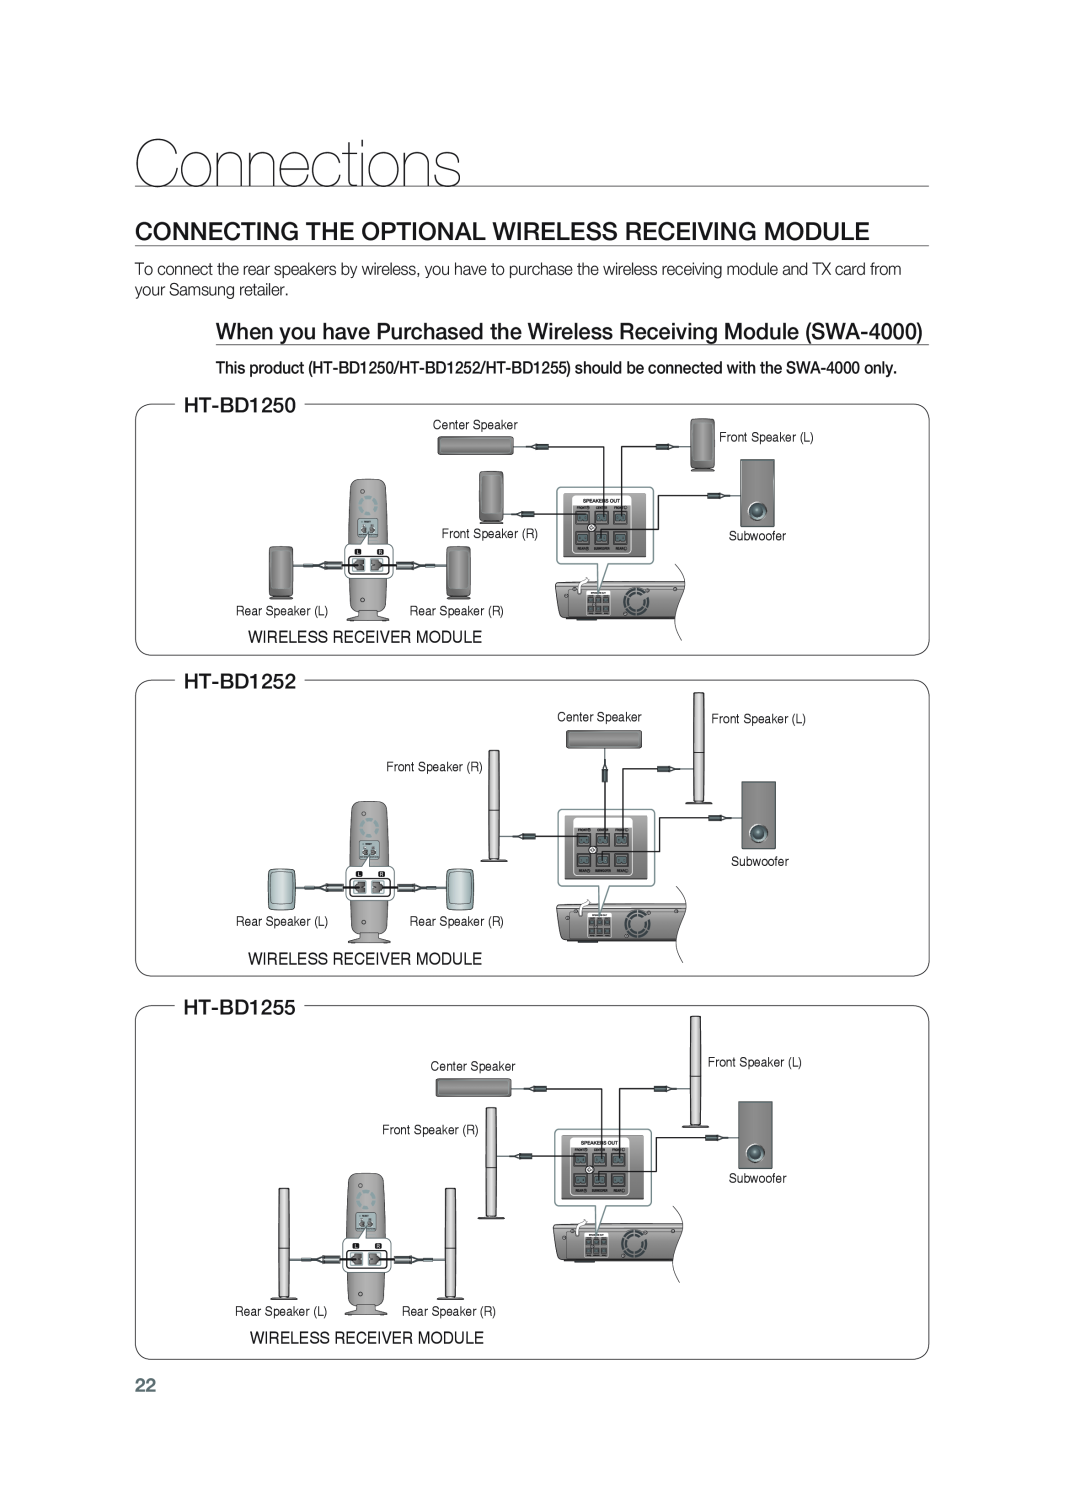 Samsung HT-BD1255 user manual Connecting The Optional Wireless Receiving Module, Connections, HT-BD1250, HT-BD1252 